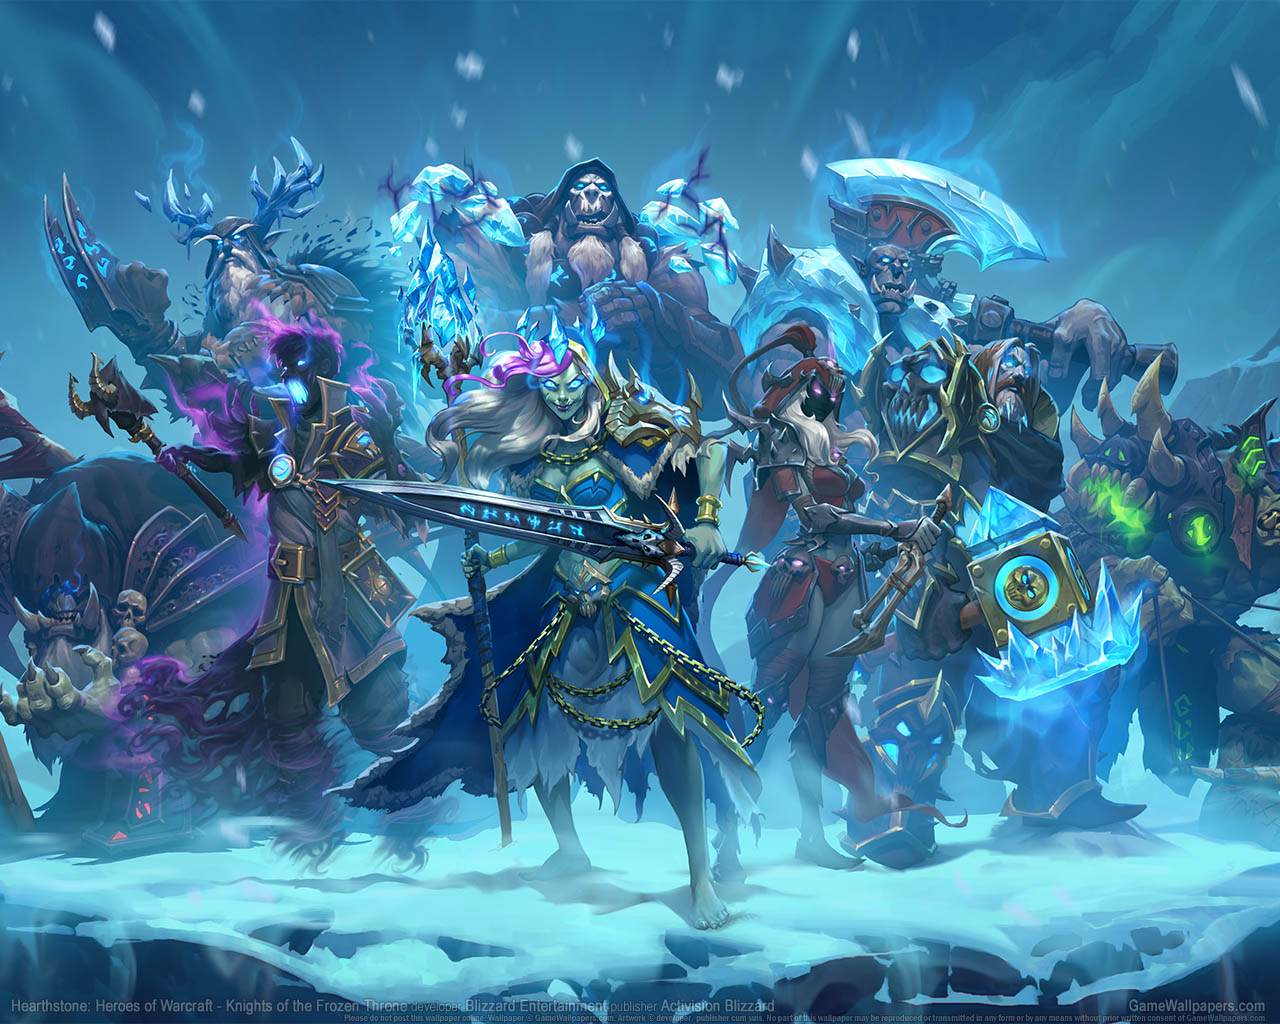 Hearthstone: Heroes of Warcraft - Knights of the Frozen Throneνmmer=02 wallpaper  1280x1024